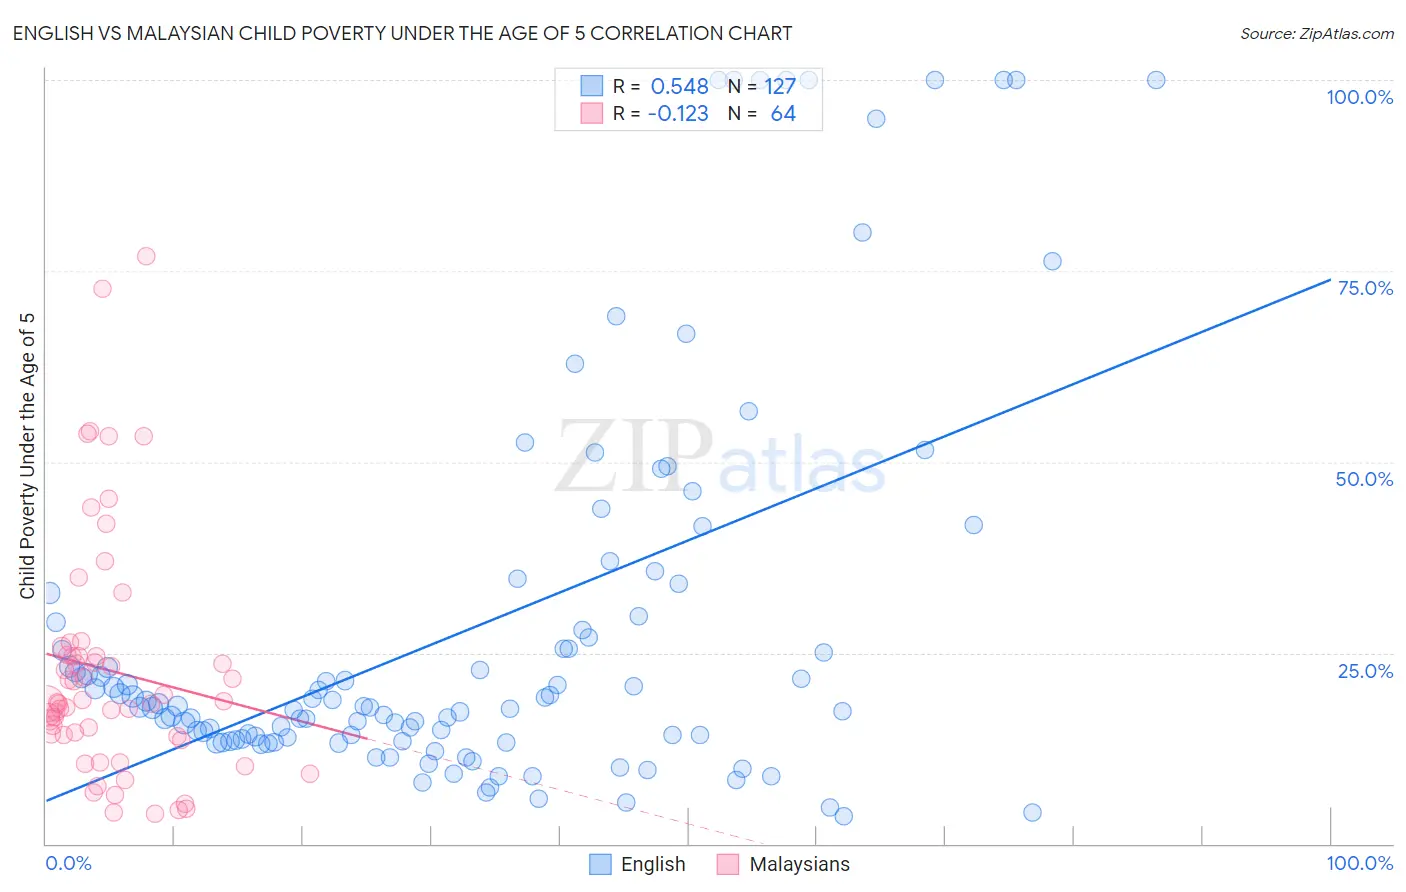 English vs Malaysian Child Poverty Under the Age of 5